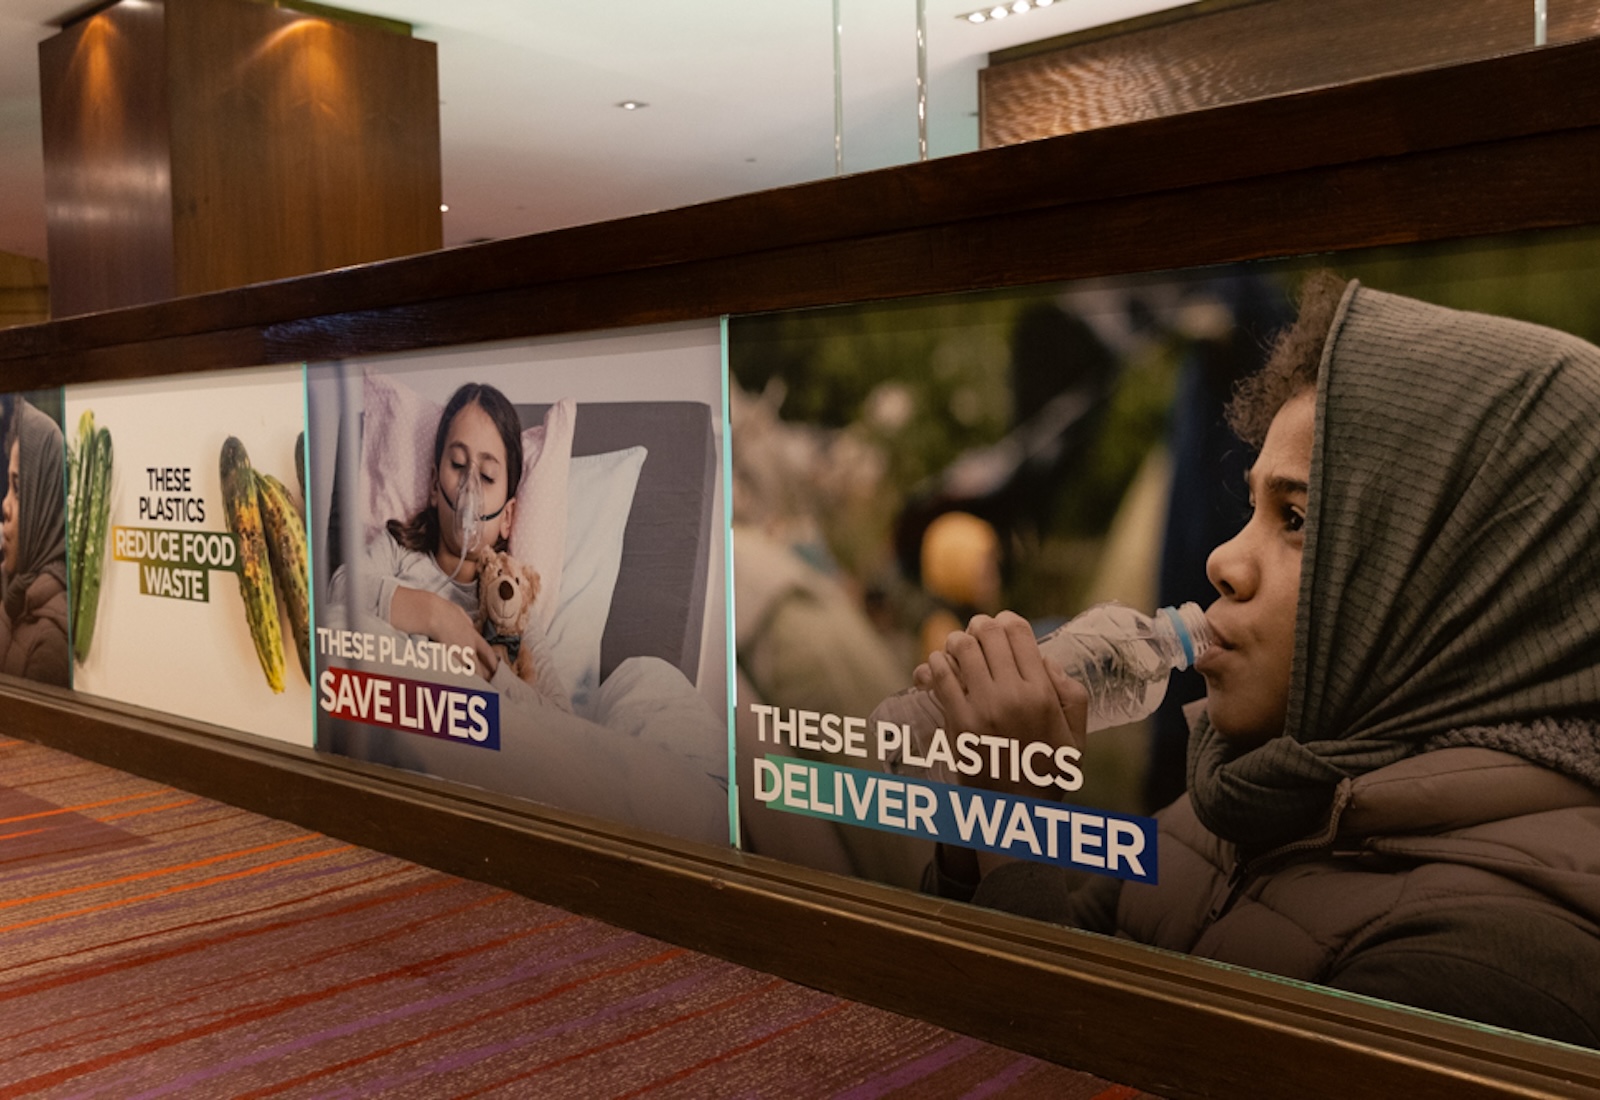 Large ads plastered on walls say 'these plastics reduce food waste' against a photograph of cucumbers, 'these plastics save lives' against a photograph of a child in a hospital bed, and 'these plastics deliver water' against a photograph of a child drinking from a disposable water bottle